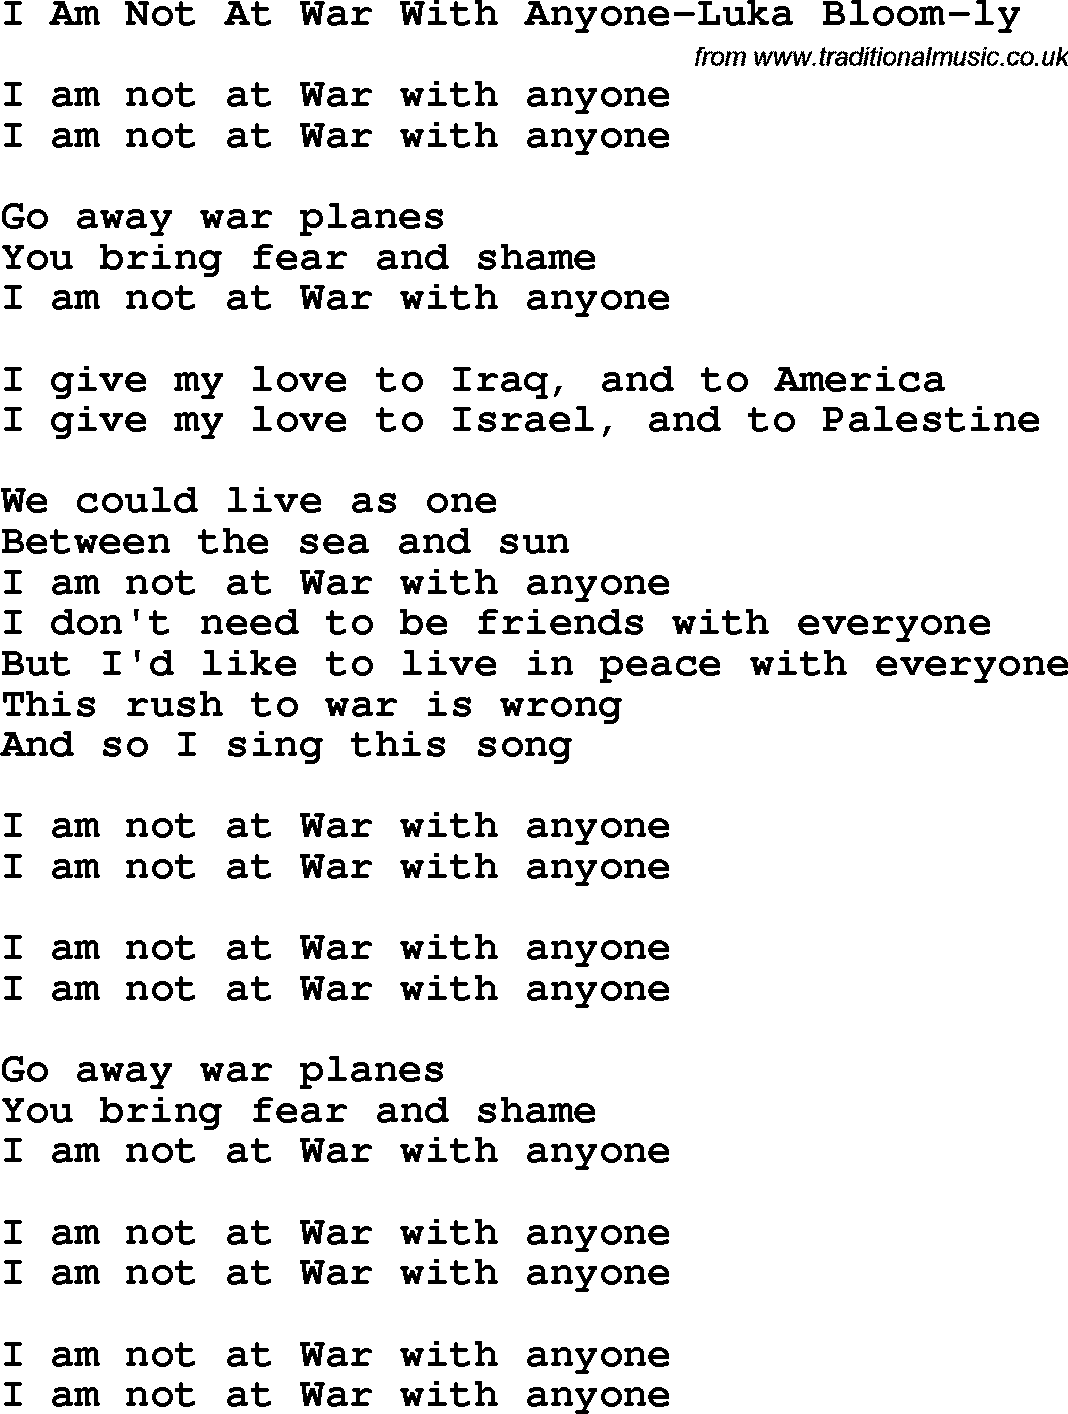 Protest Song I Am Not At War With Anyone-Luka Bloom-Ly lyrics and chords